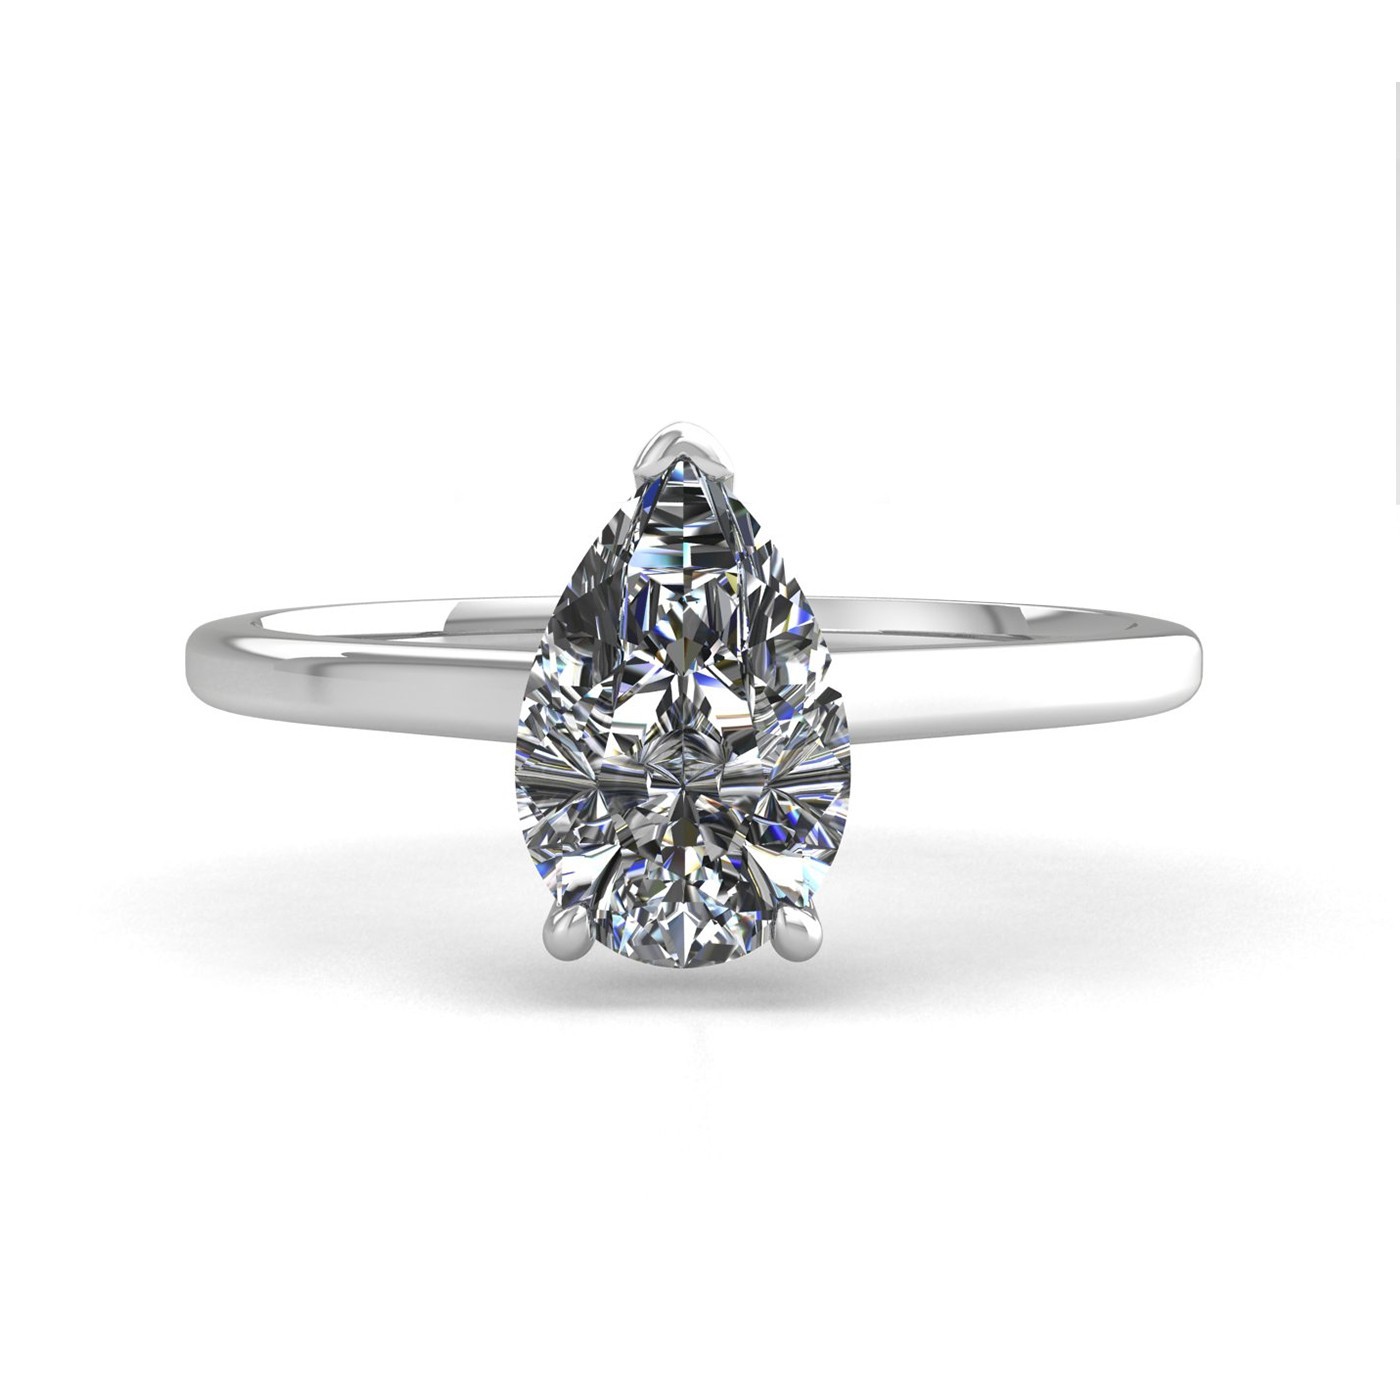 18k white gold  0,30 ct 3 prongs solitaire pear cut diamond engagement ring with whisper thin band Photos & images